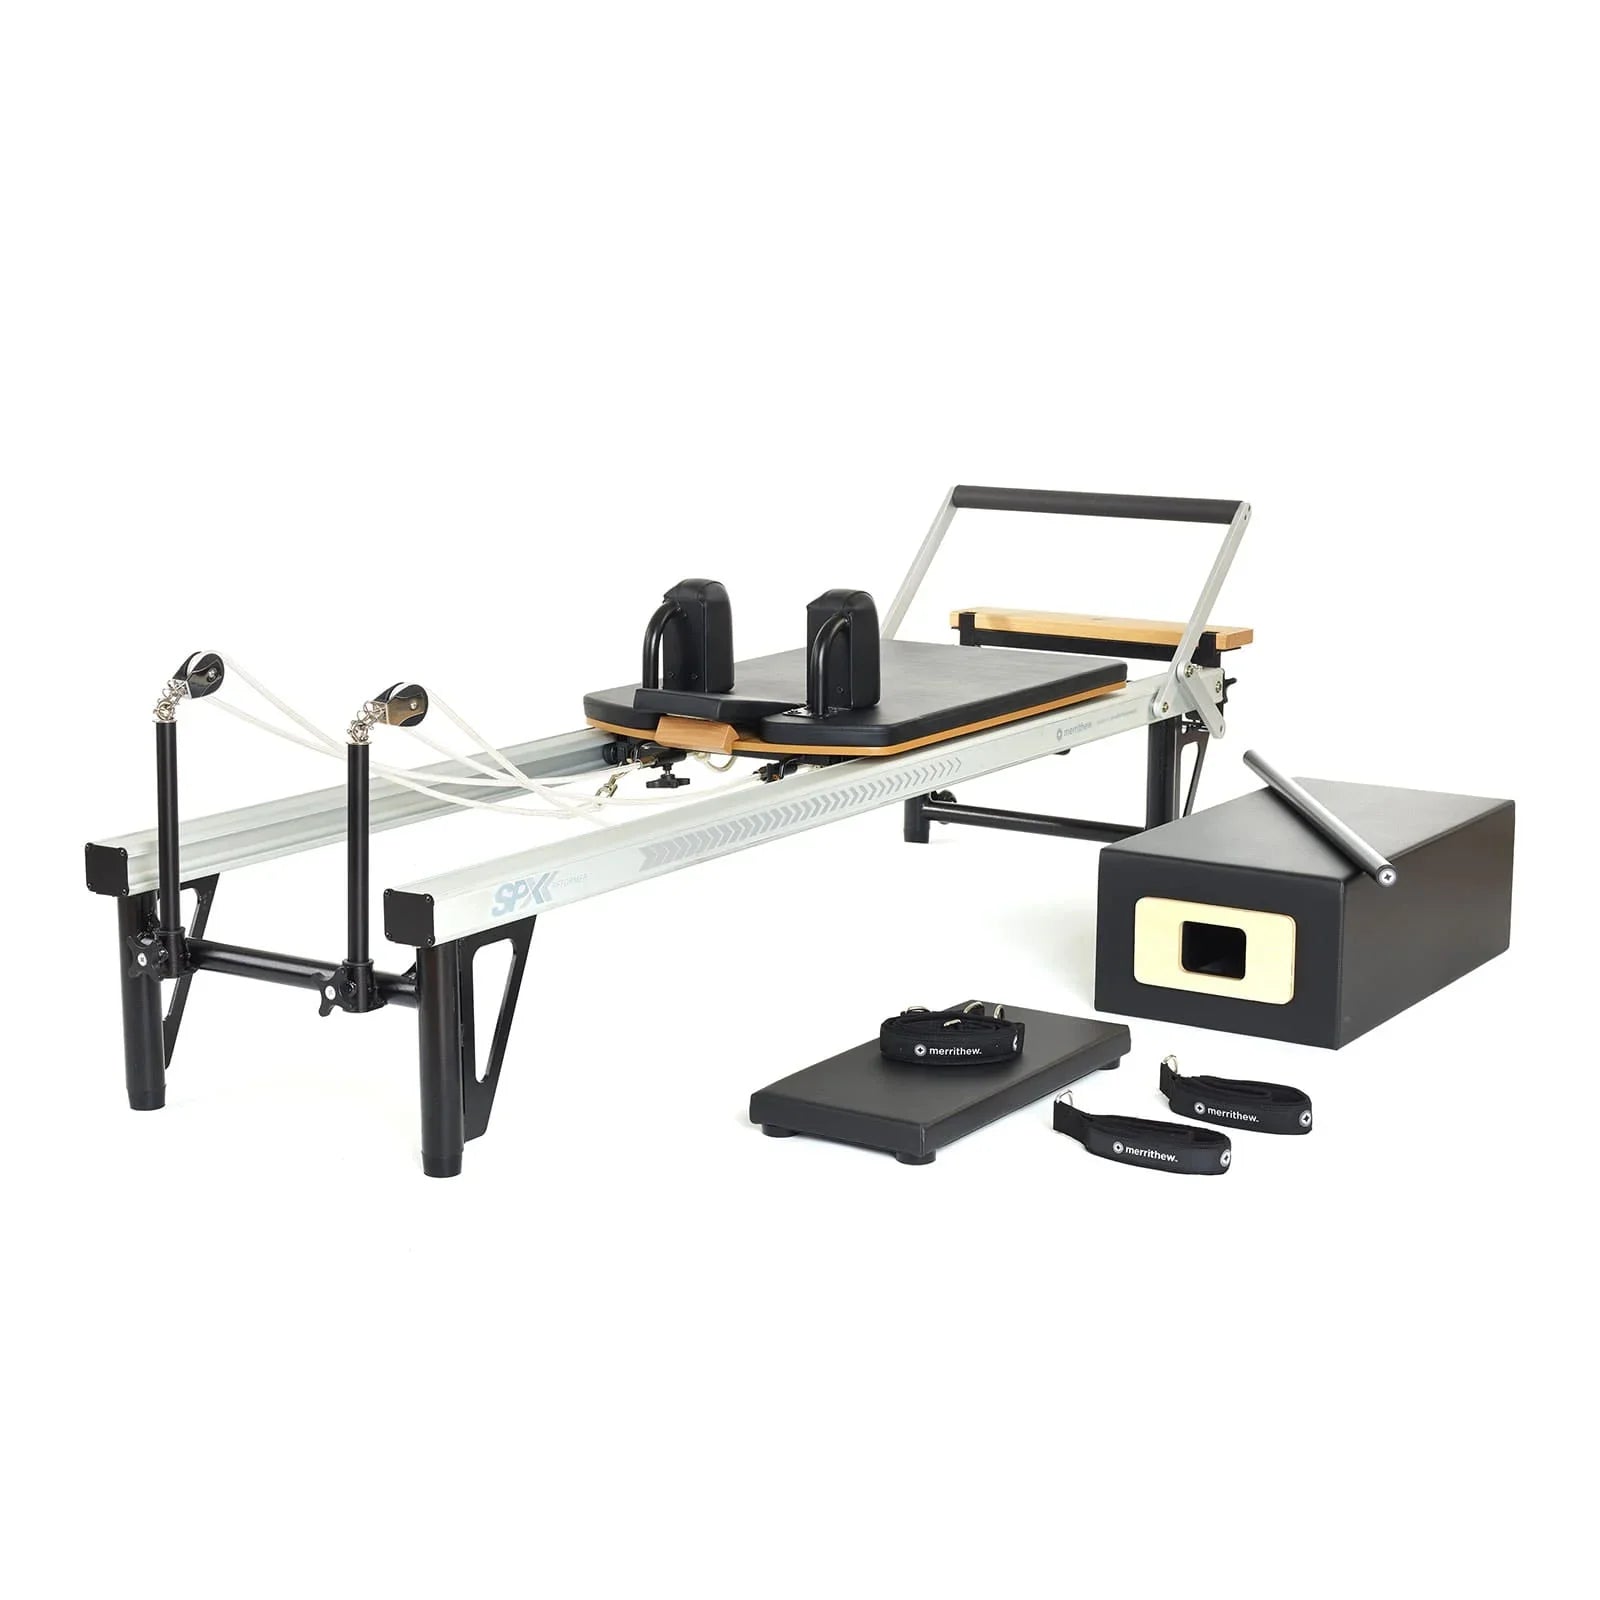 Merrithew™ Pilates At Home SPX® Reformer Deluxe Bundle Pilates reformer bundle Merrithew Elevated (16" off ground)  